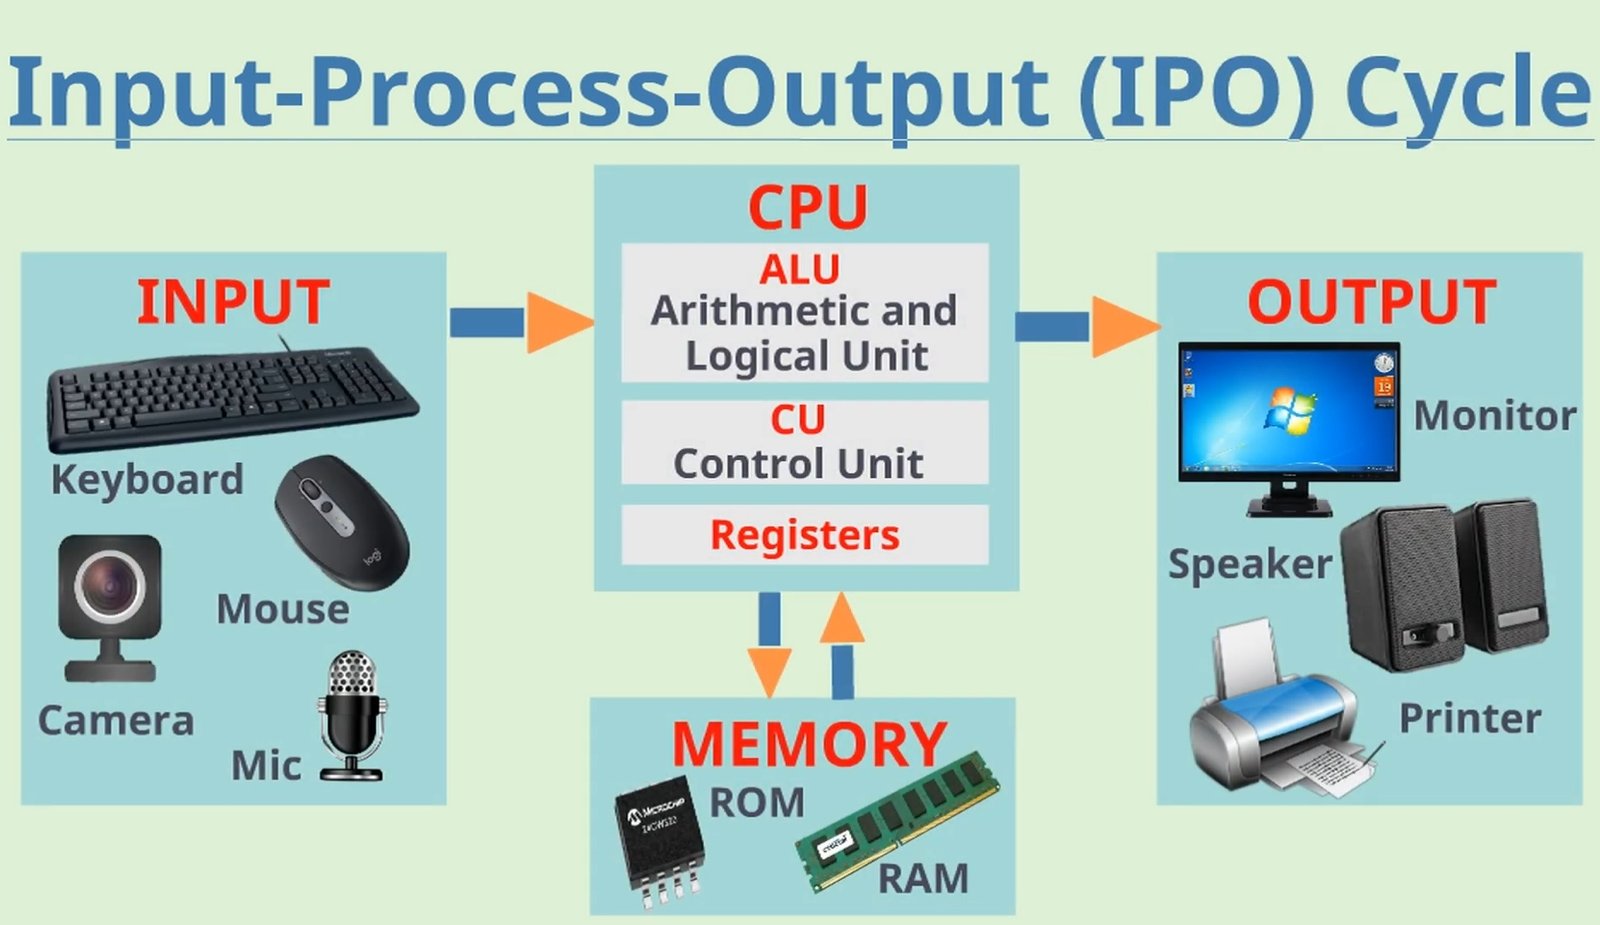 Process components. Инпут аутпут. Input process output. Input-output (IPO) модель. Input and output devices.